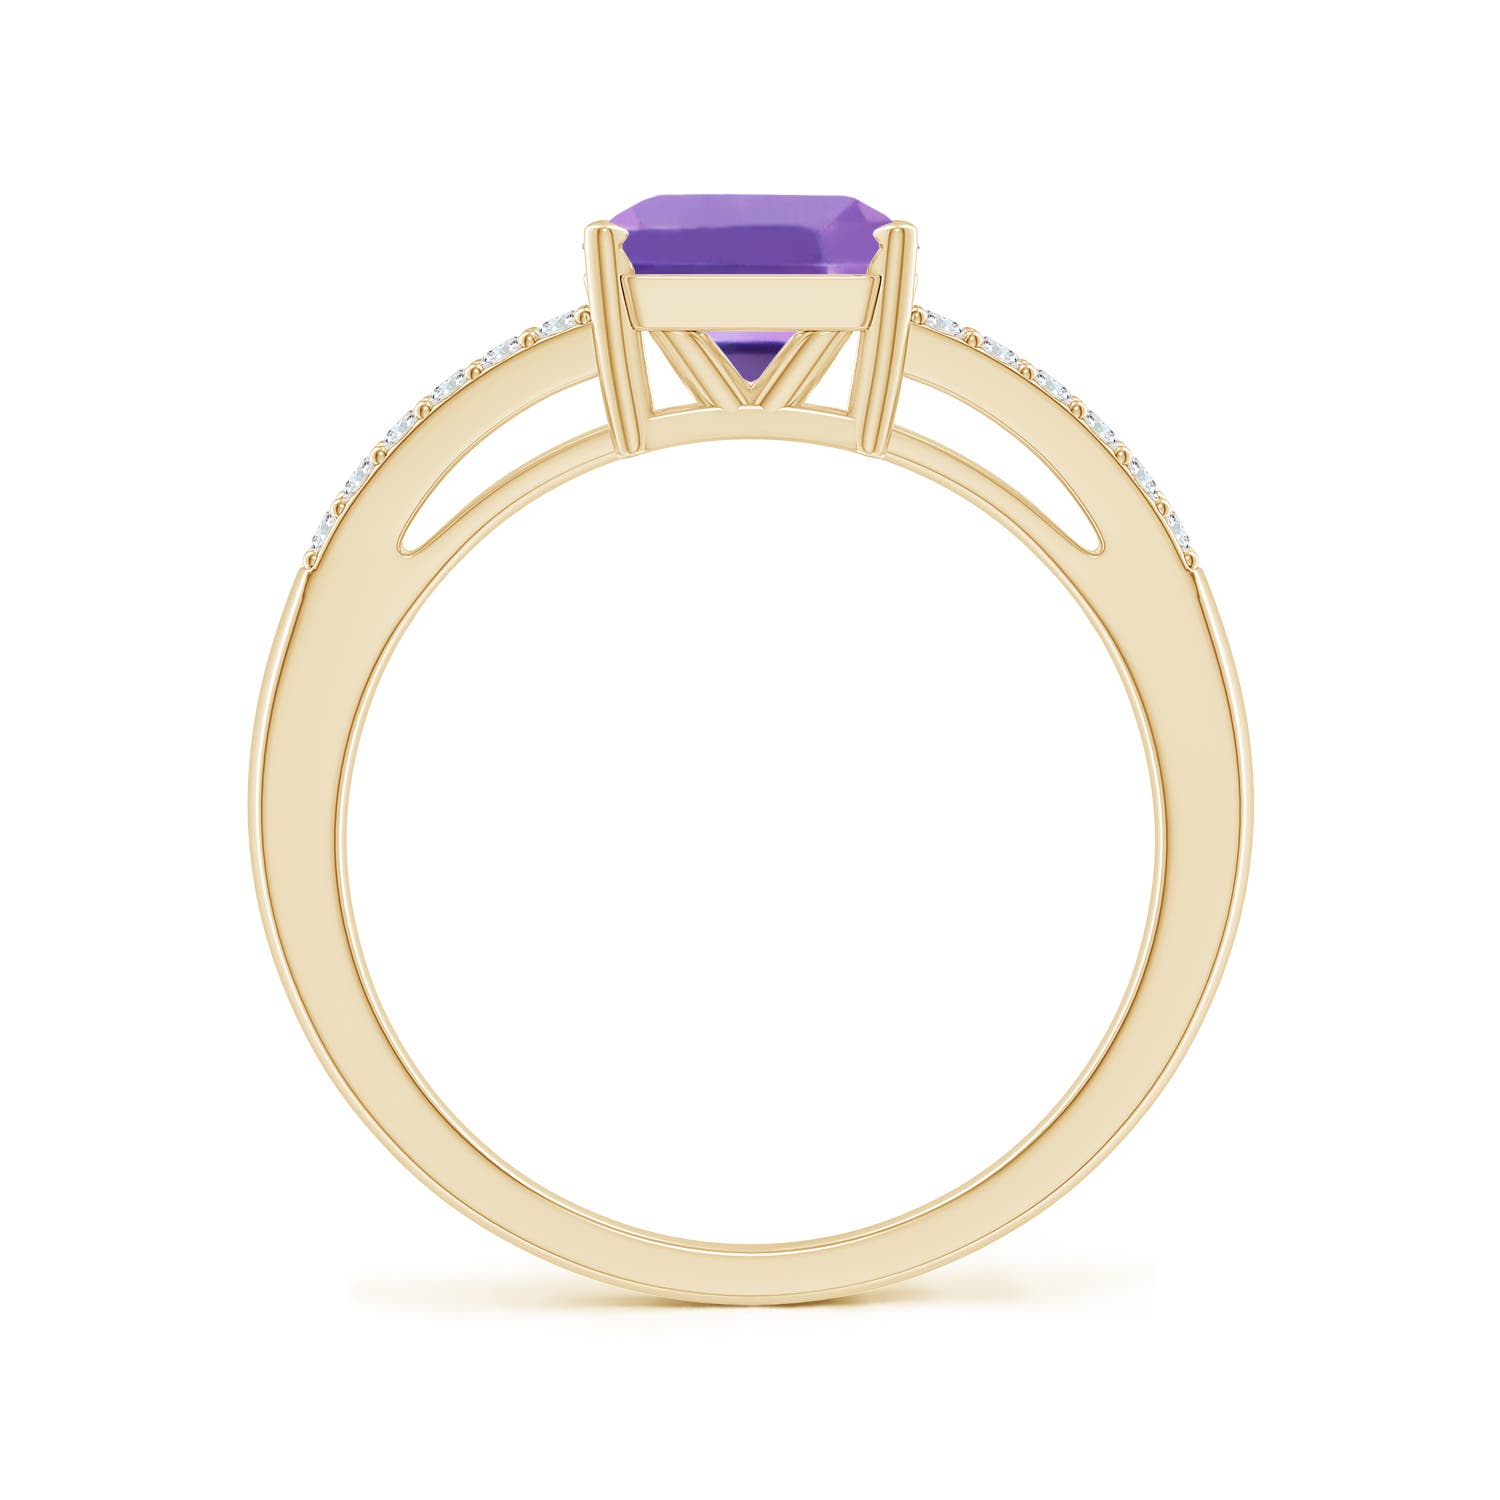 A - Amethyst / 1.54 CT / 14 KT Yellow Gold